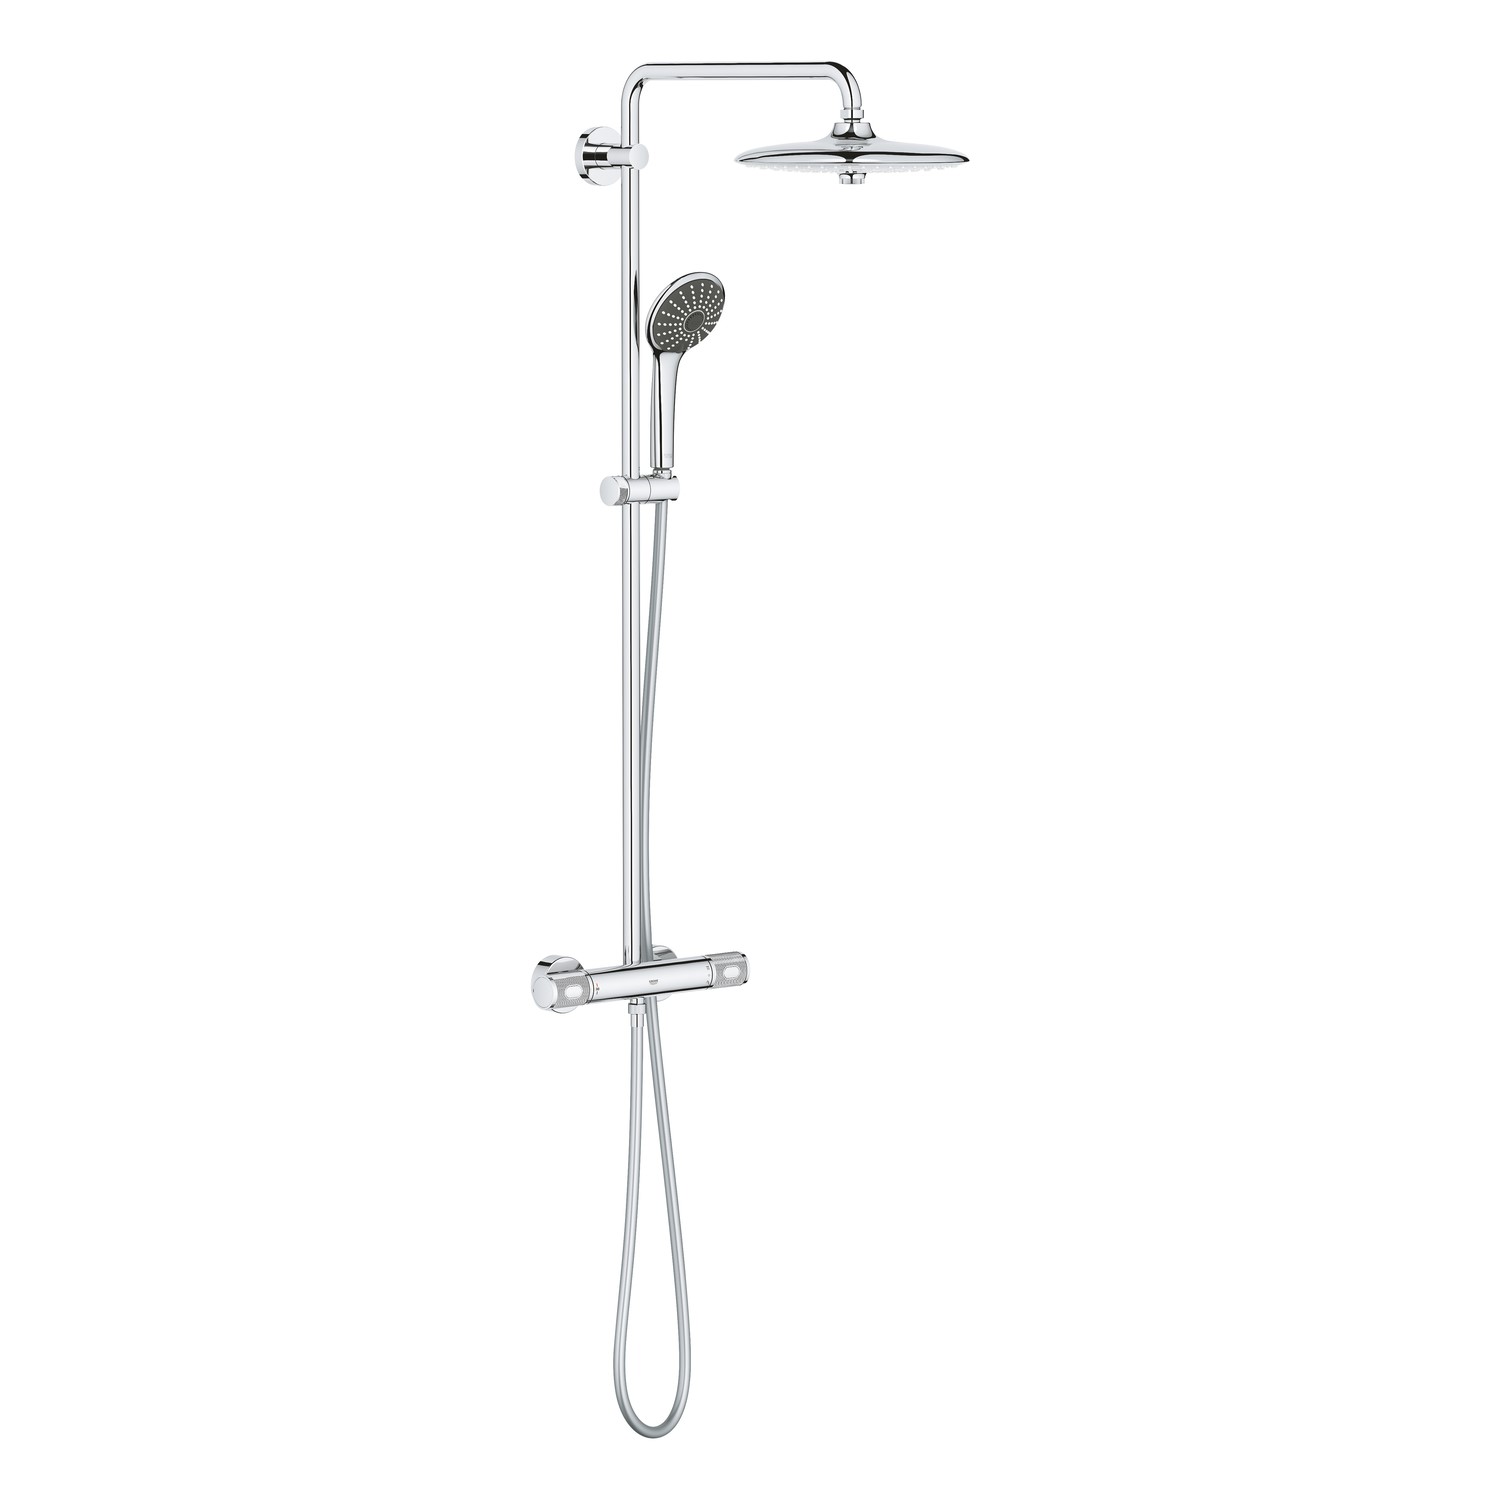 Chrome Thermostatic Mixer Shower System - Grohe Vitalio Start